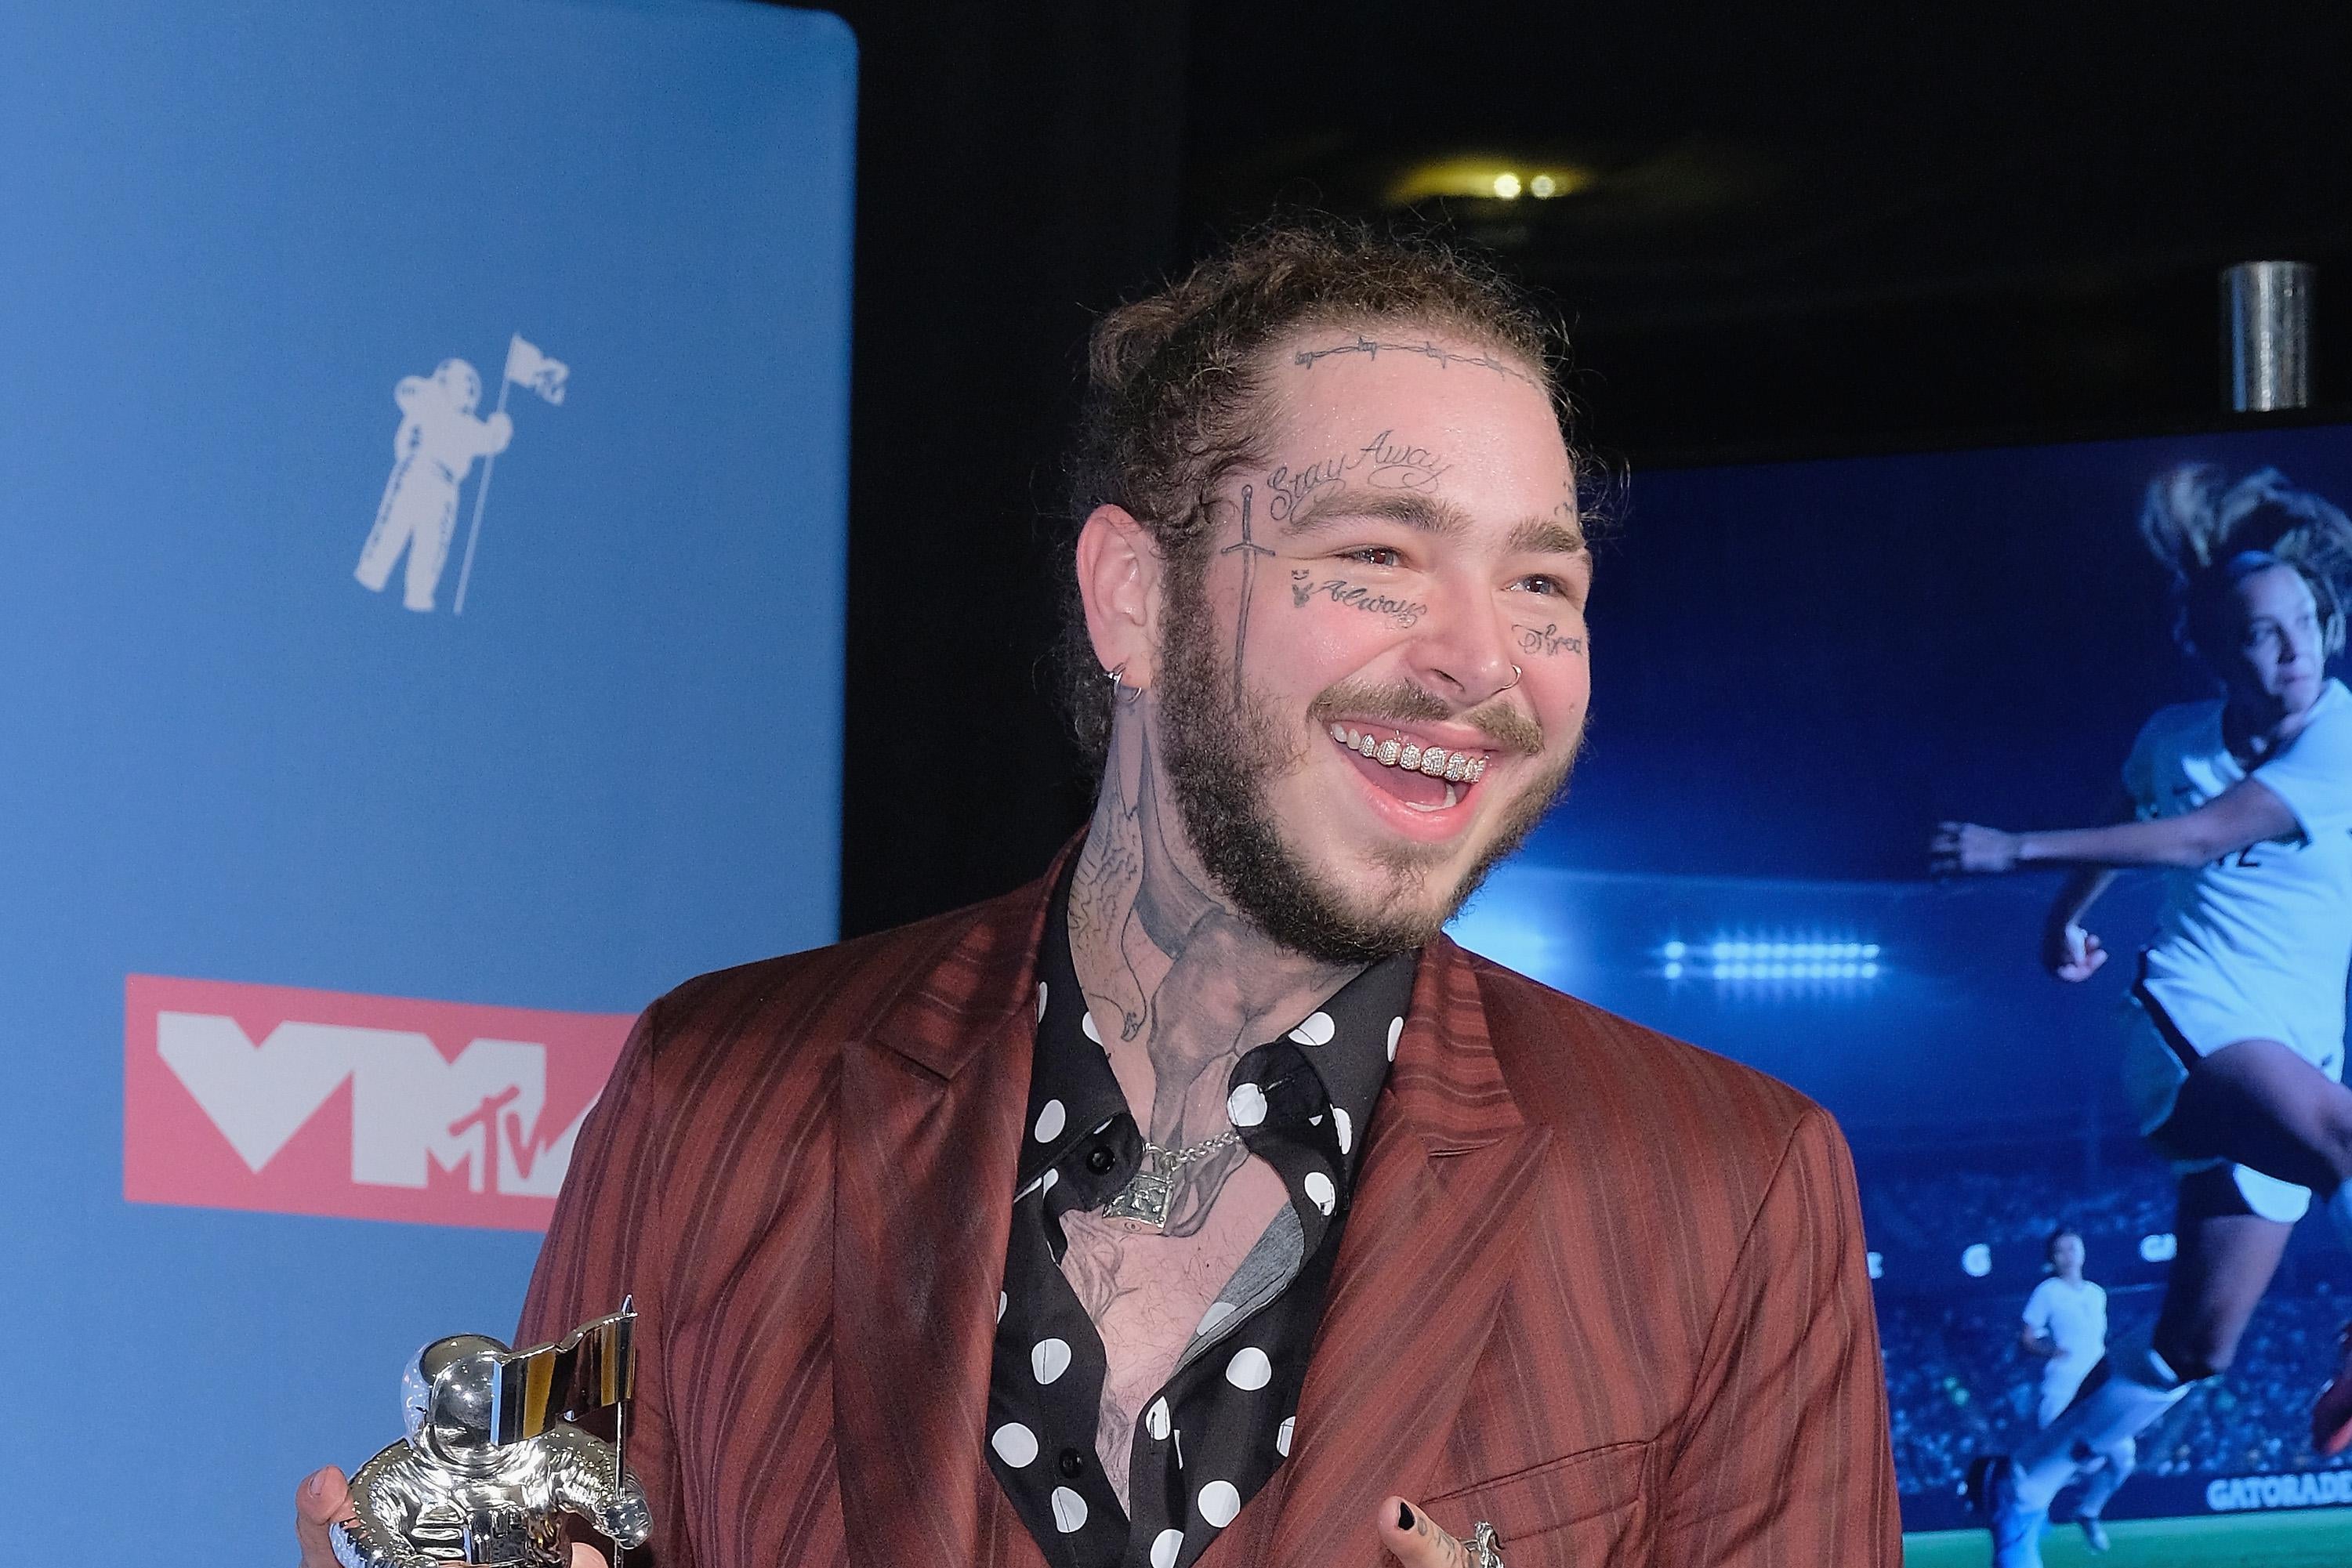 Post Malone at the 2018 MTV Video Music Awards.